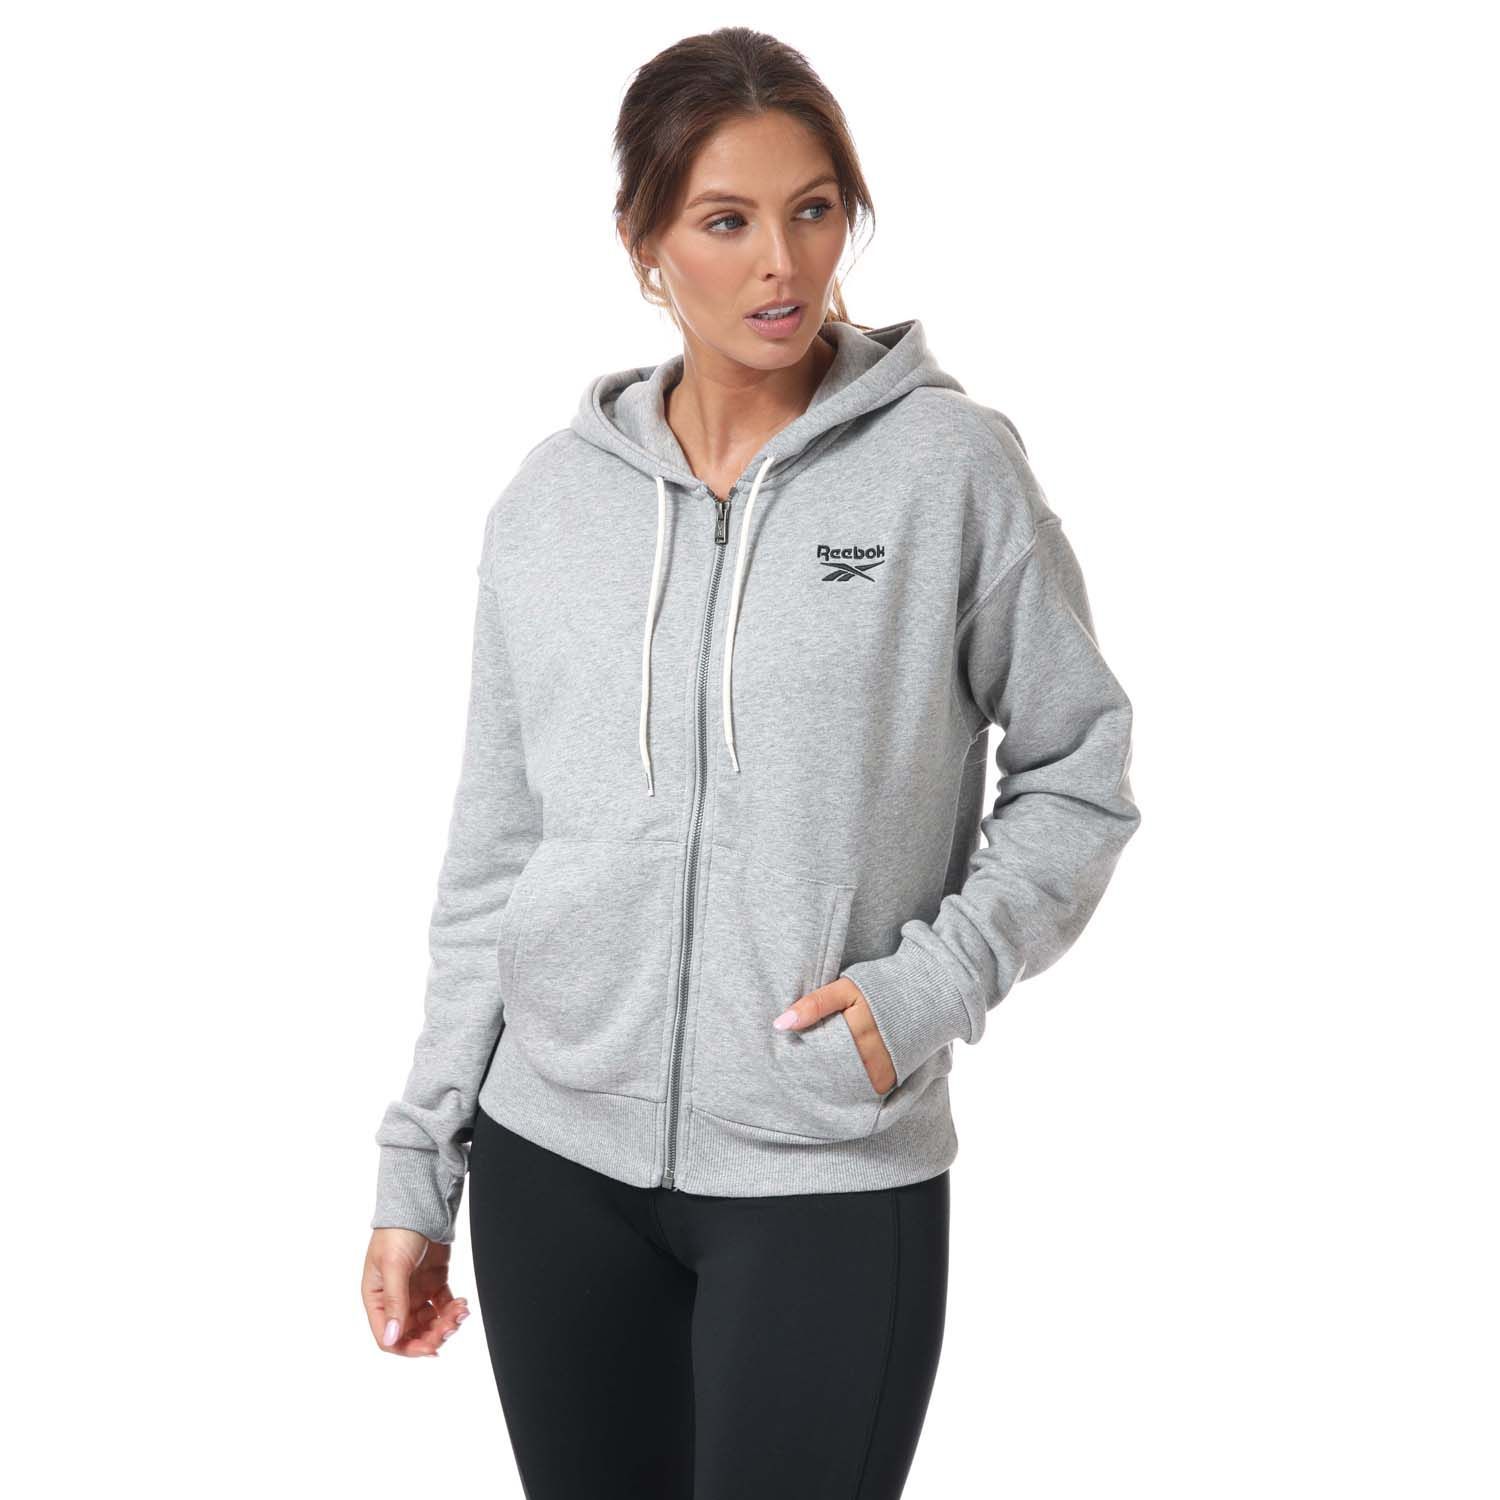 Womens Reebok Identity Zip- Up Track Top in grey heather.- Drawcord-adjustable hood.- Long sleeves with ribbed cuffs.- Full zip fastening.- Kangaroo pocket.- Ribbed hem.- Small logo.- Oversize fit.- Main Material: 80% Cotton  20% Polyester (Recycled). Rib Part: 95% Cotton  5% Elastane. - Ref:GI6607